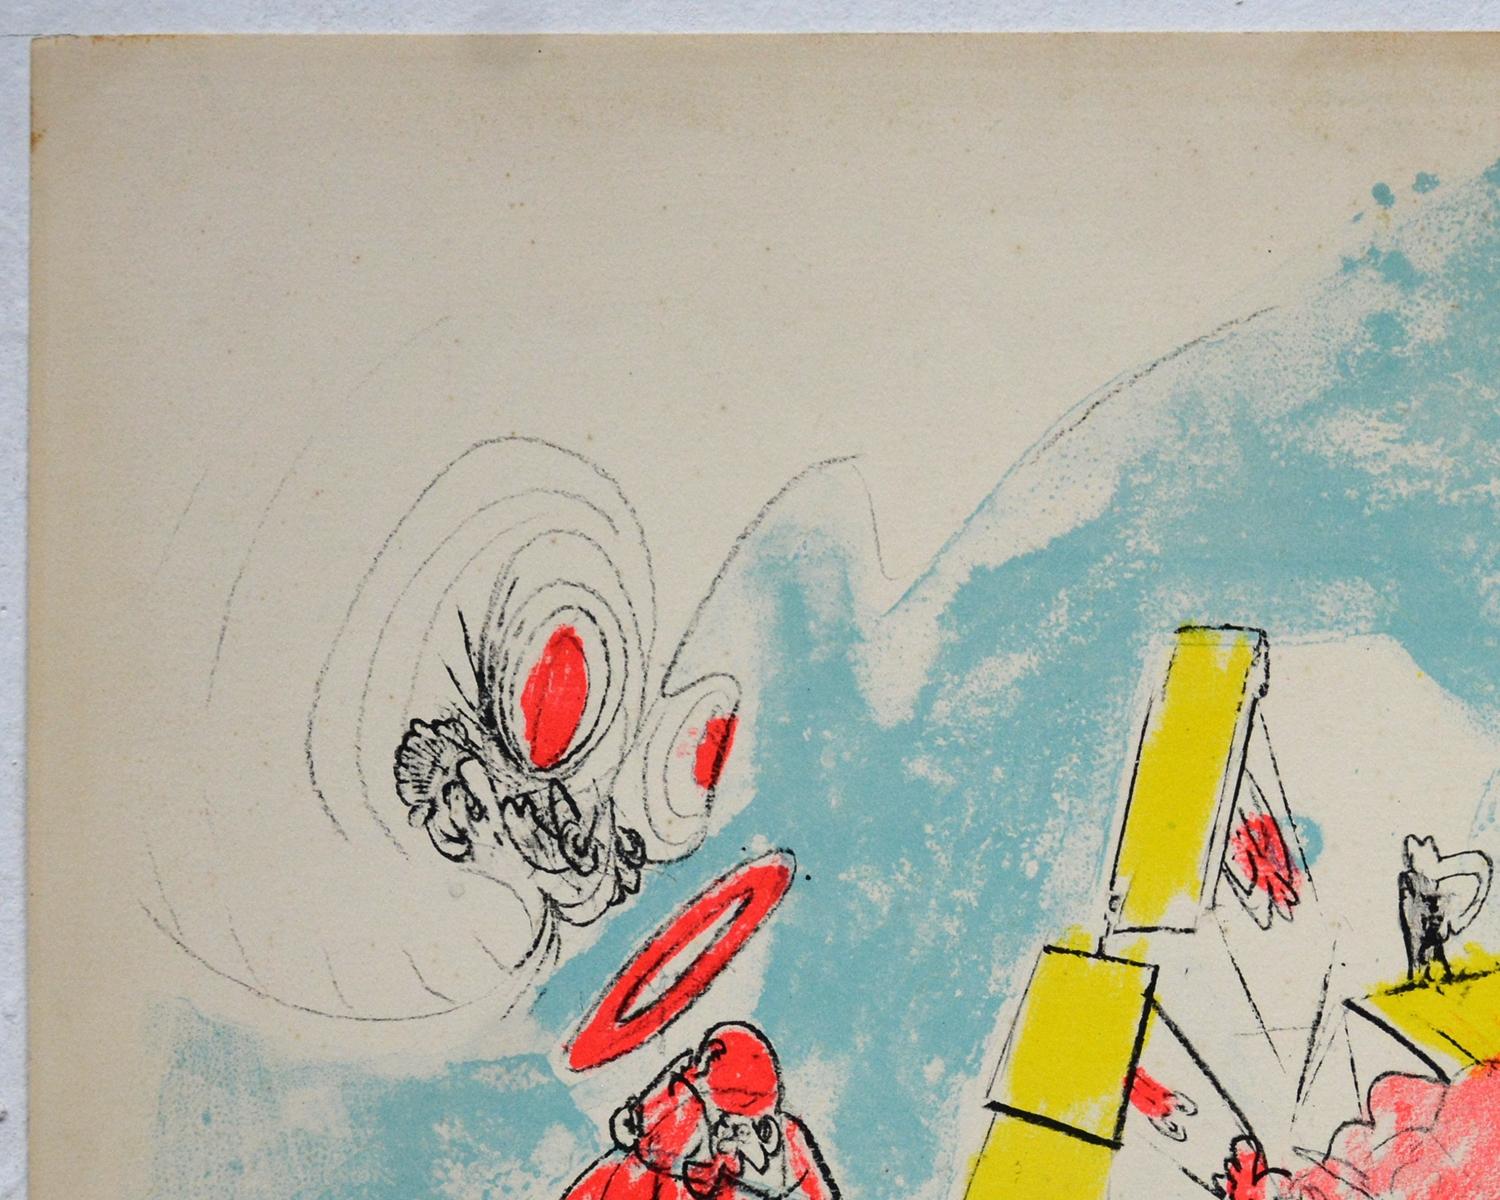 Roberto Matta (Chile, 1911-2002)
'Hecatomb of the Bulls V', 1971
lithograph on paper Velin Arches 300 g.
19.7 x 25.6 in. (50 x 64.9 cm.)
Edition of 100
Regular condition
Unframed



